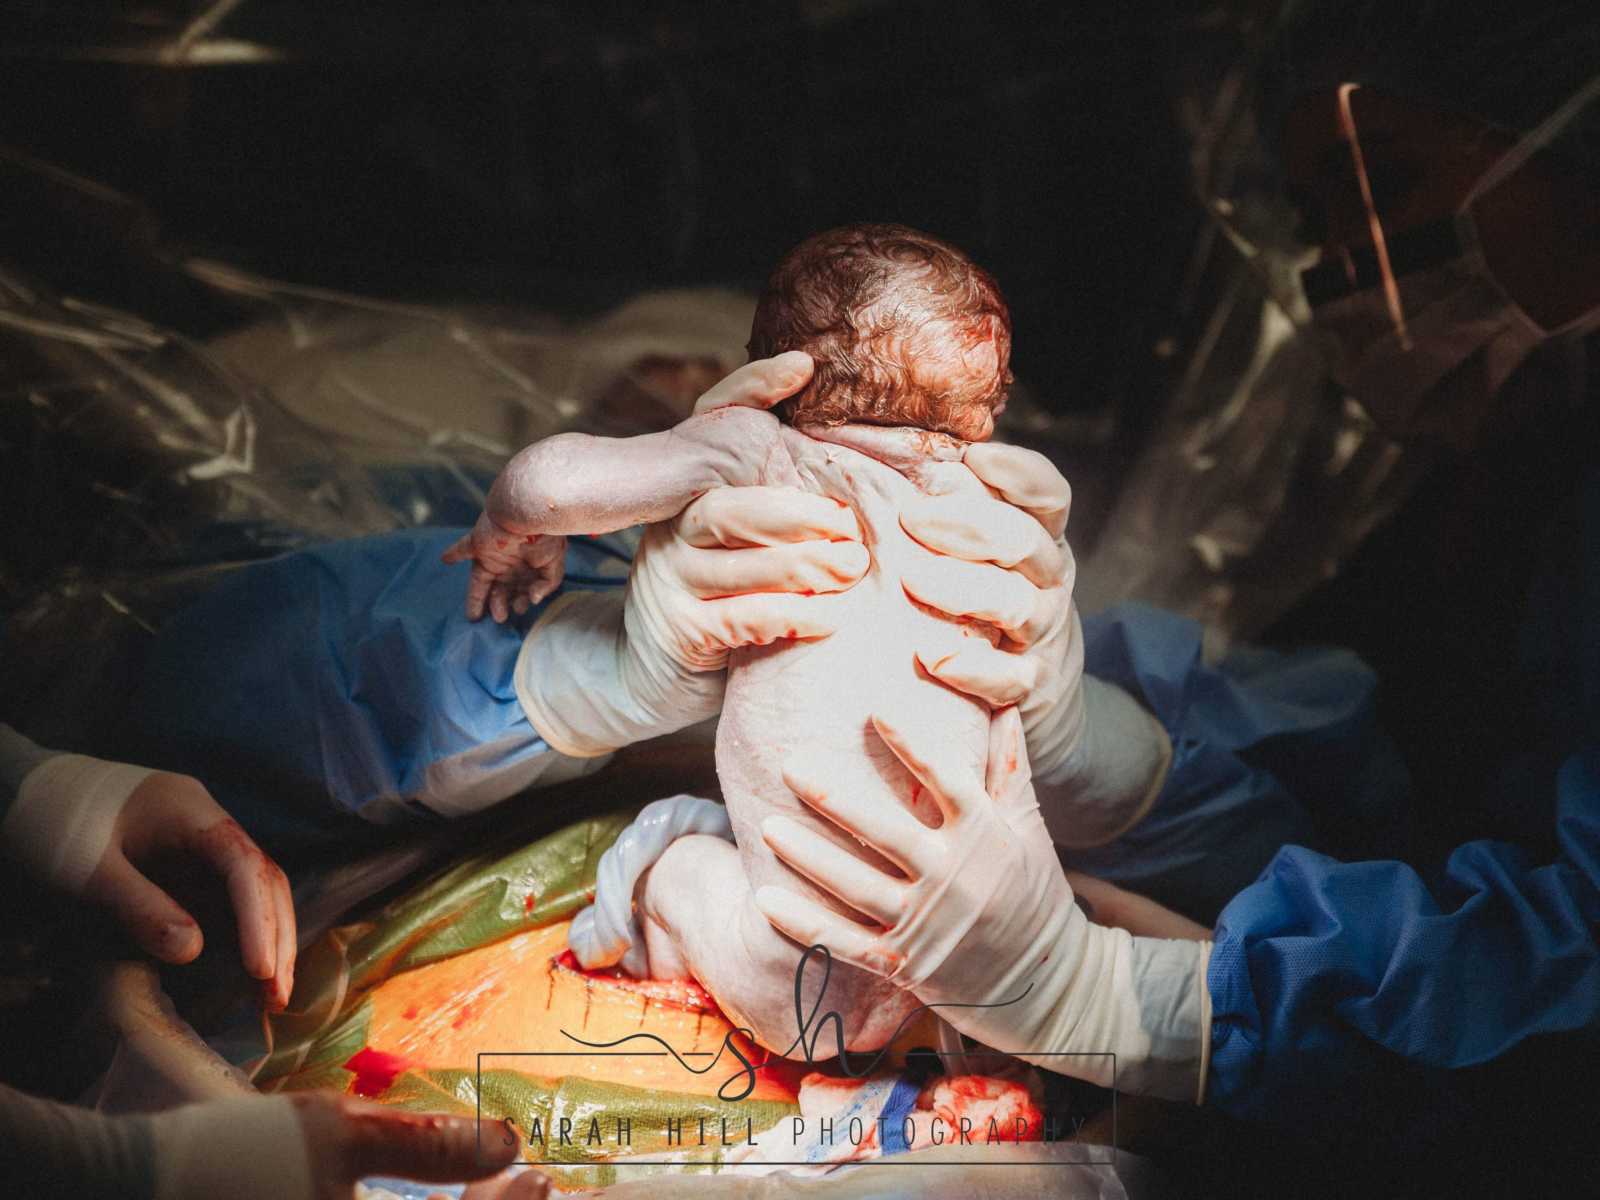 Mother who is also a midwife received a c-section pulls baby out herself